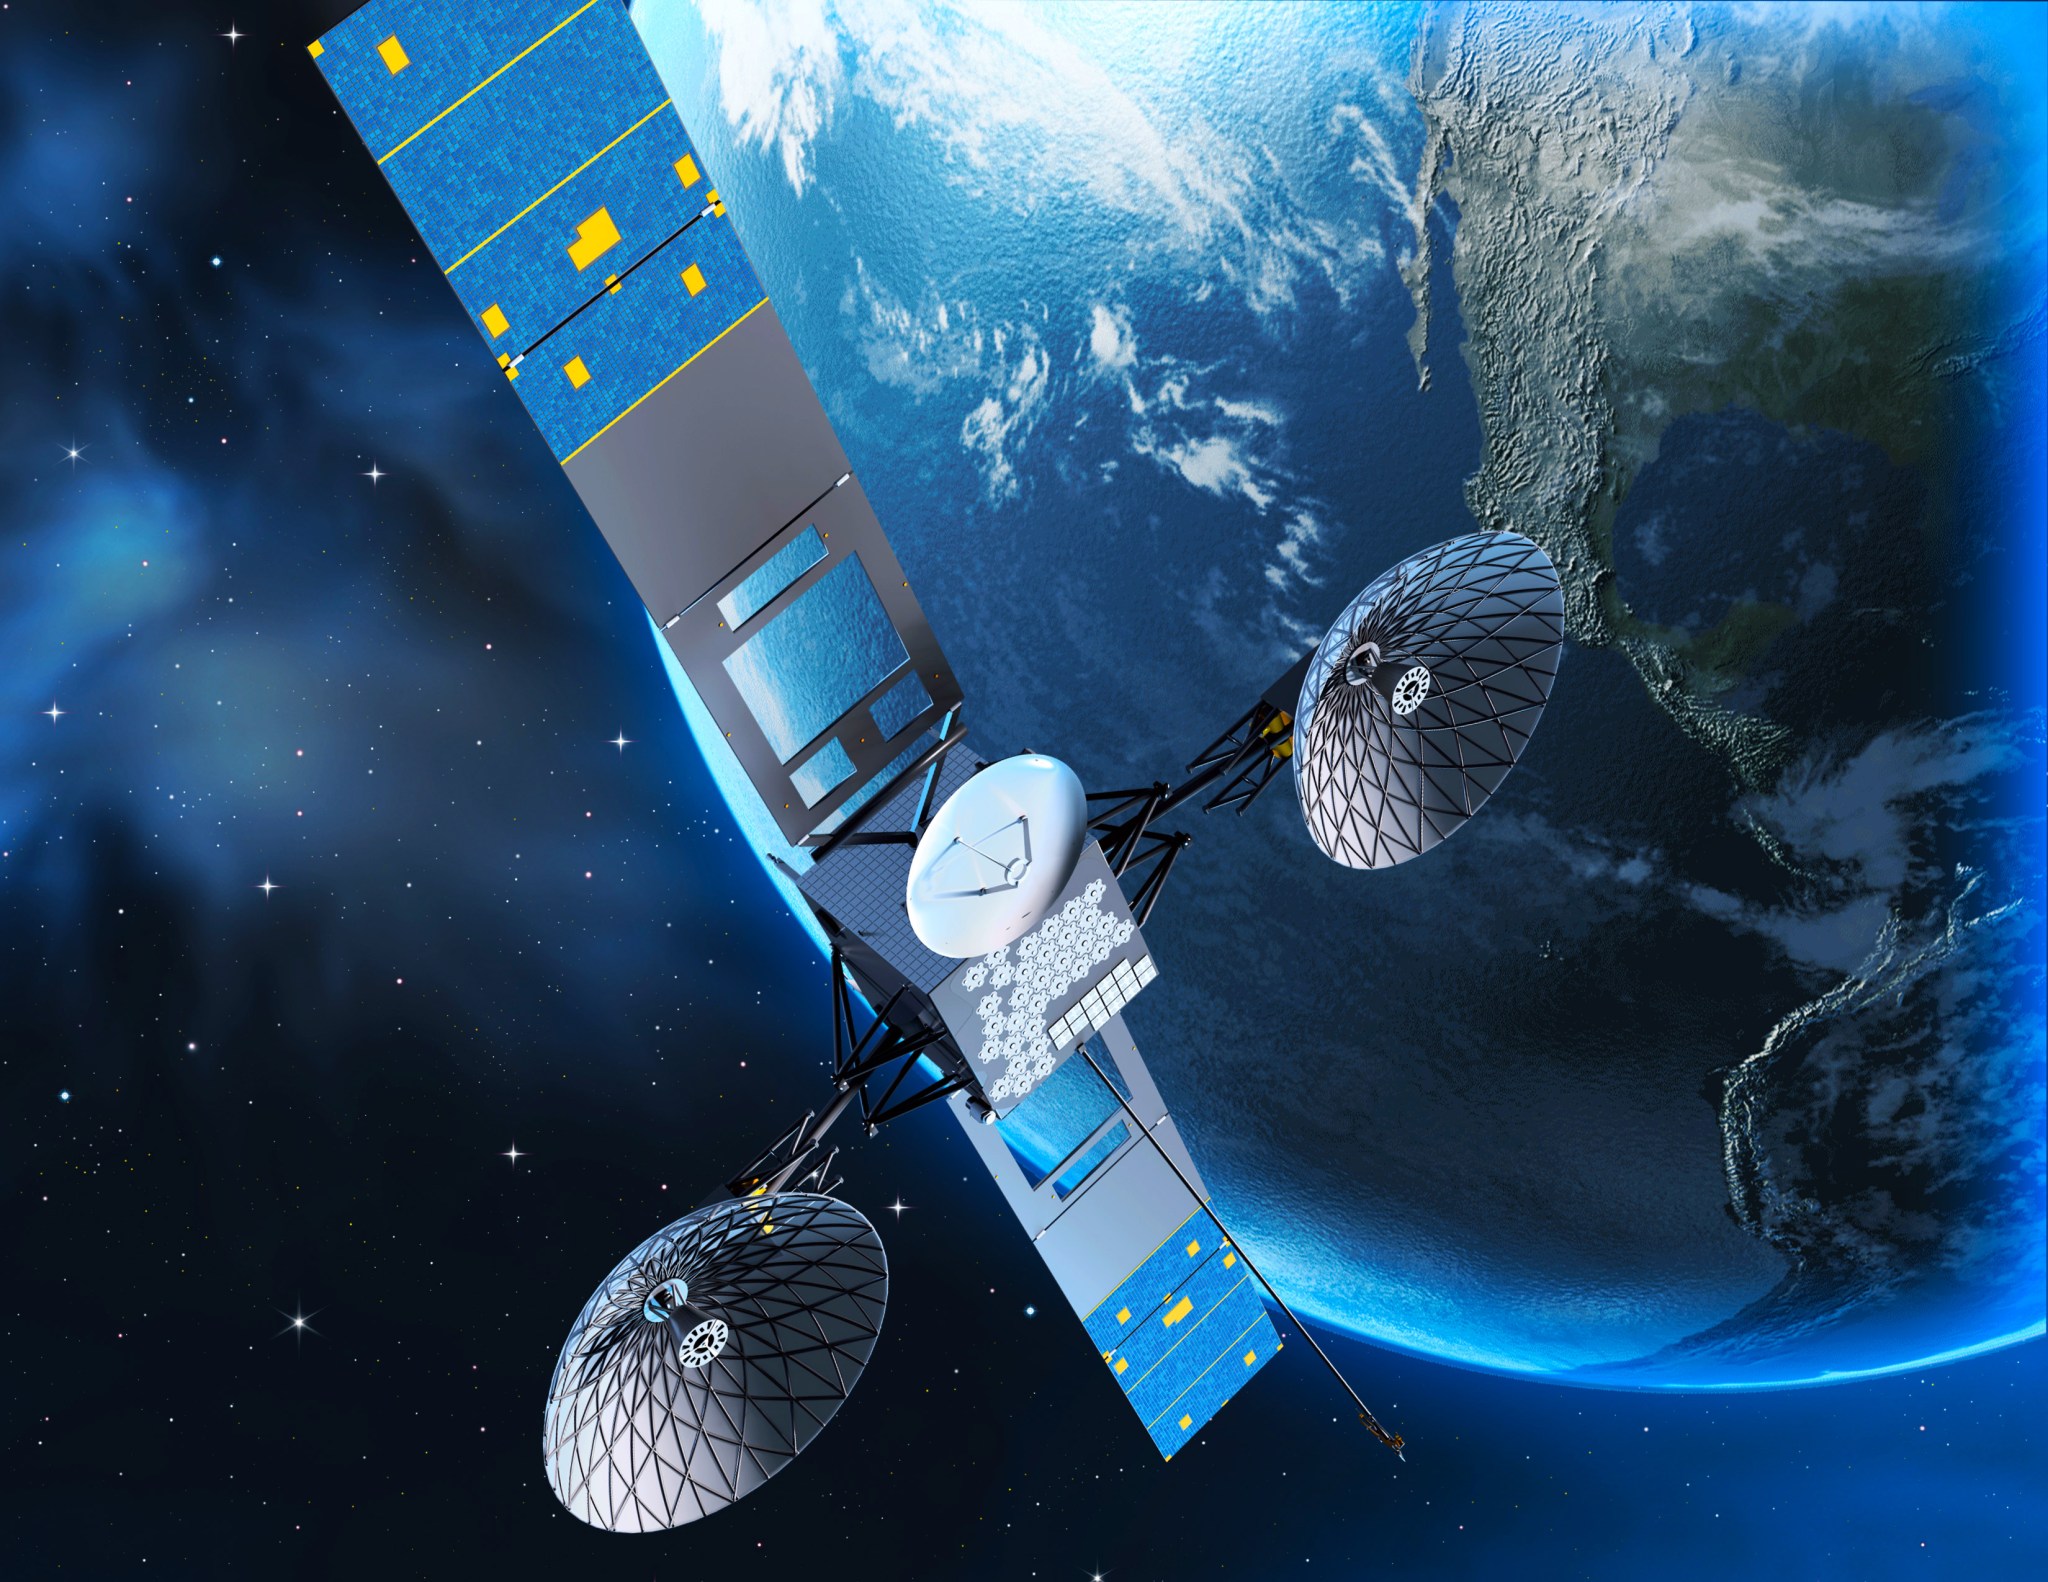 Artist's concept of a Tracking and Data Relay (TDRS) satellite in orbit around the Earth.